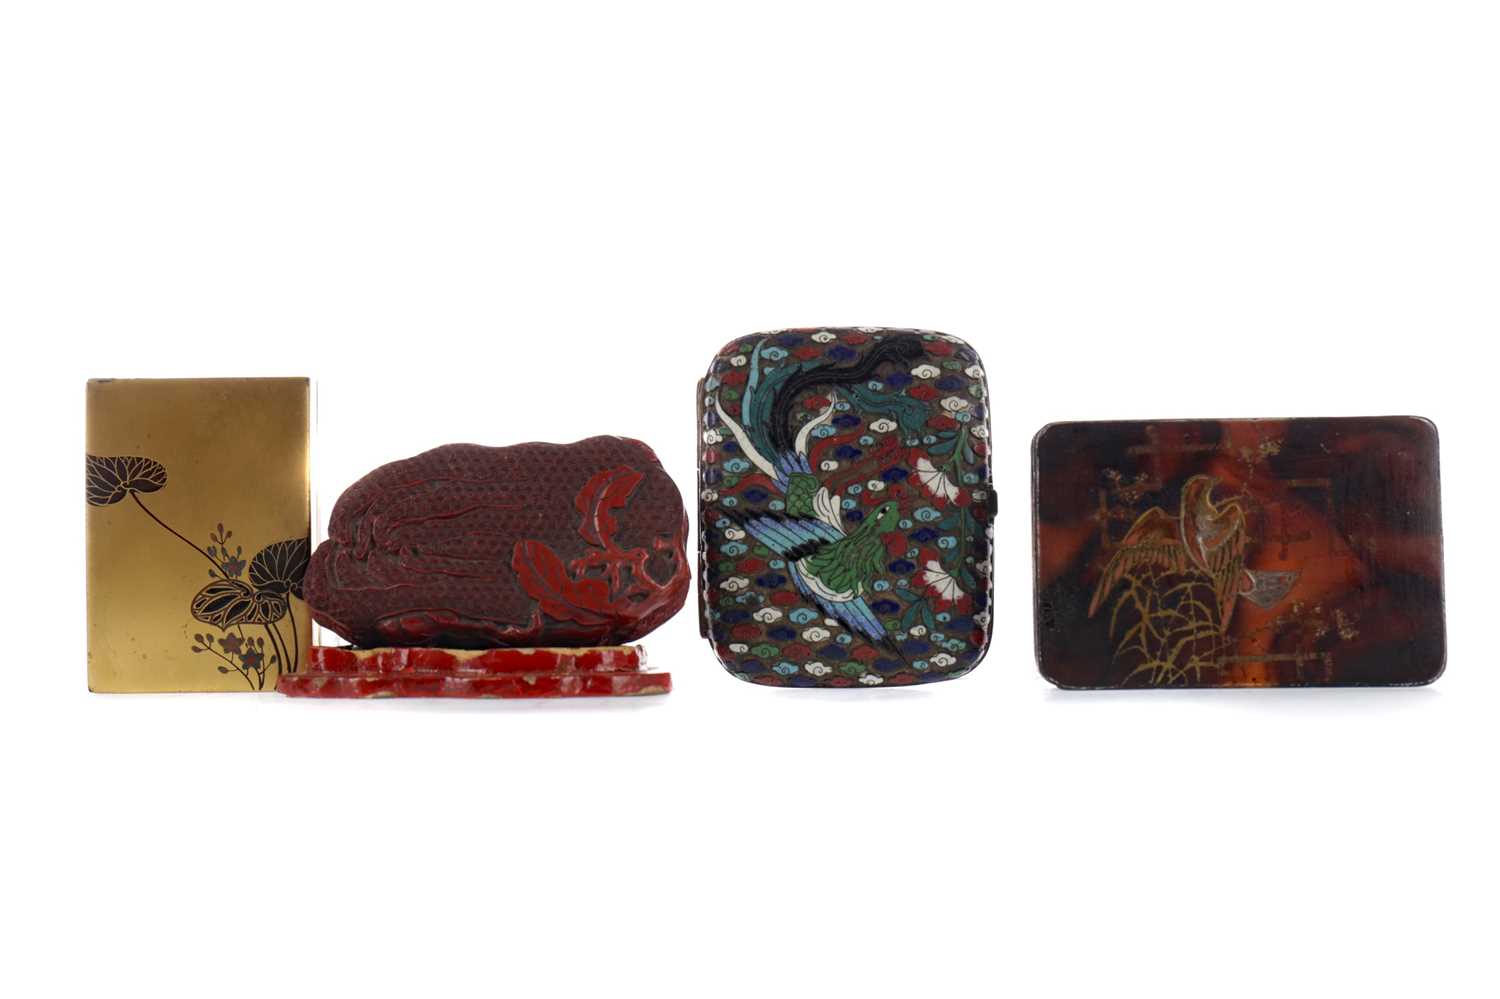 Lot 511 - A LATE 19TH CENTURY CHINESE CLOISONNE CIGARETTE CASE, ALONG WITH THREE BOXES